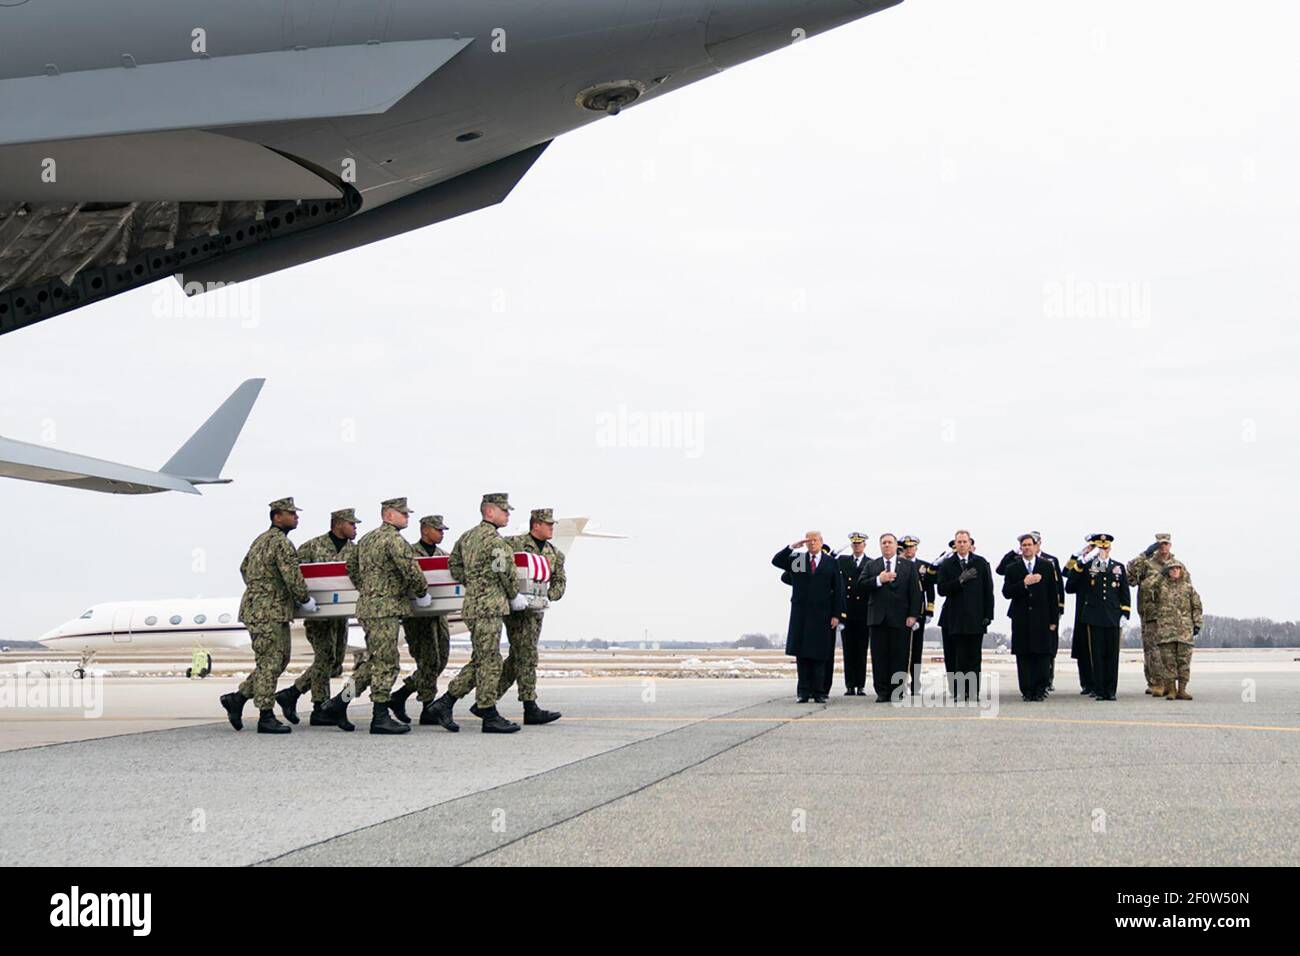 President Donald Trump joined by Secretary of State Mike Pompeo and acting Secretary of Defense Patrick Shanahan attends the dignified transfer of remains Saturday January 19 2019 at Dover Air Force Base in Dover Delaware for four Americans killed in a suicide explosion Wednesday in Syria. Stock Photo